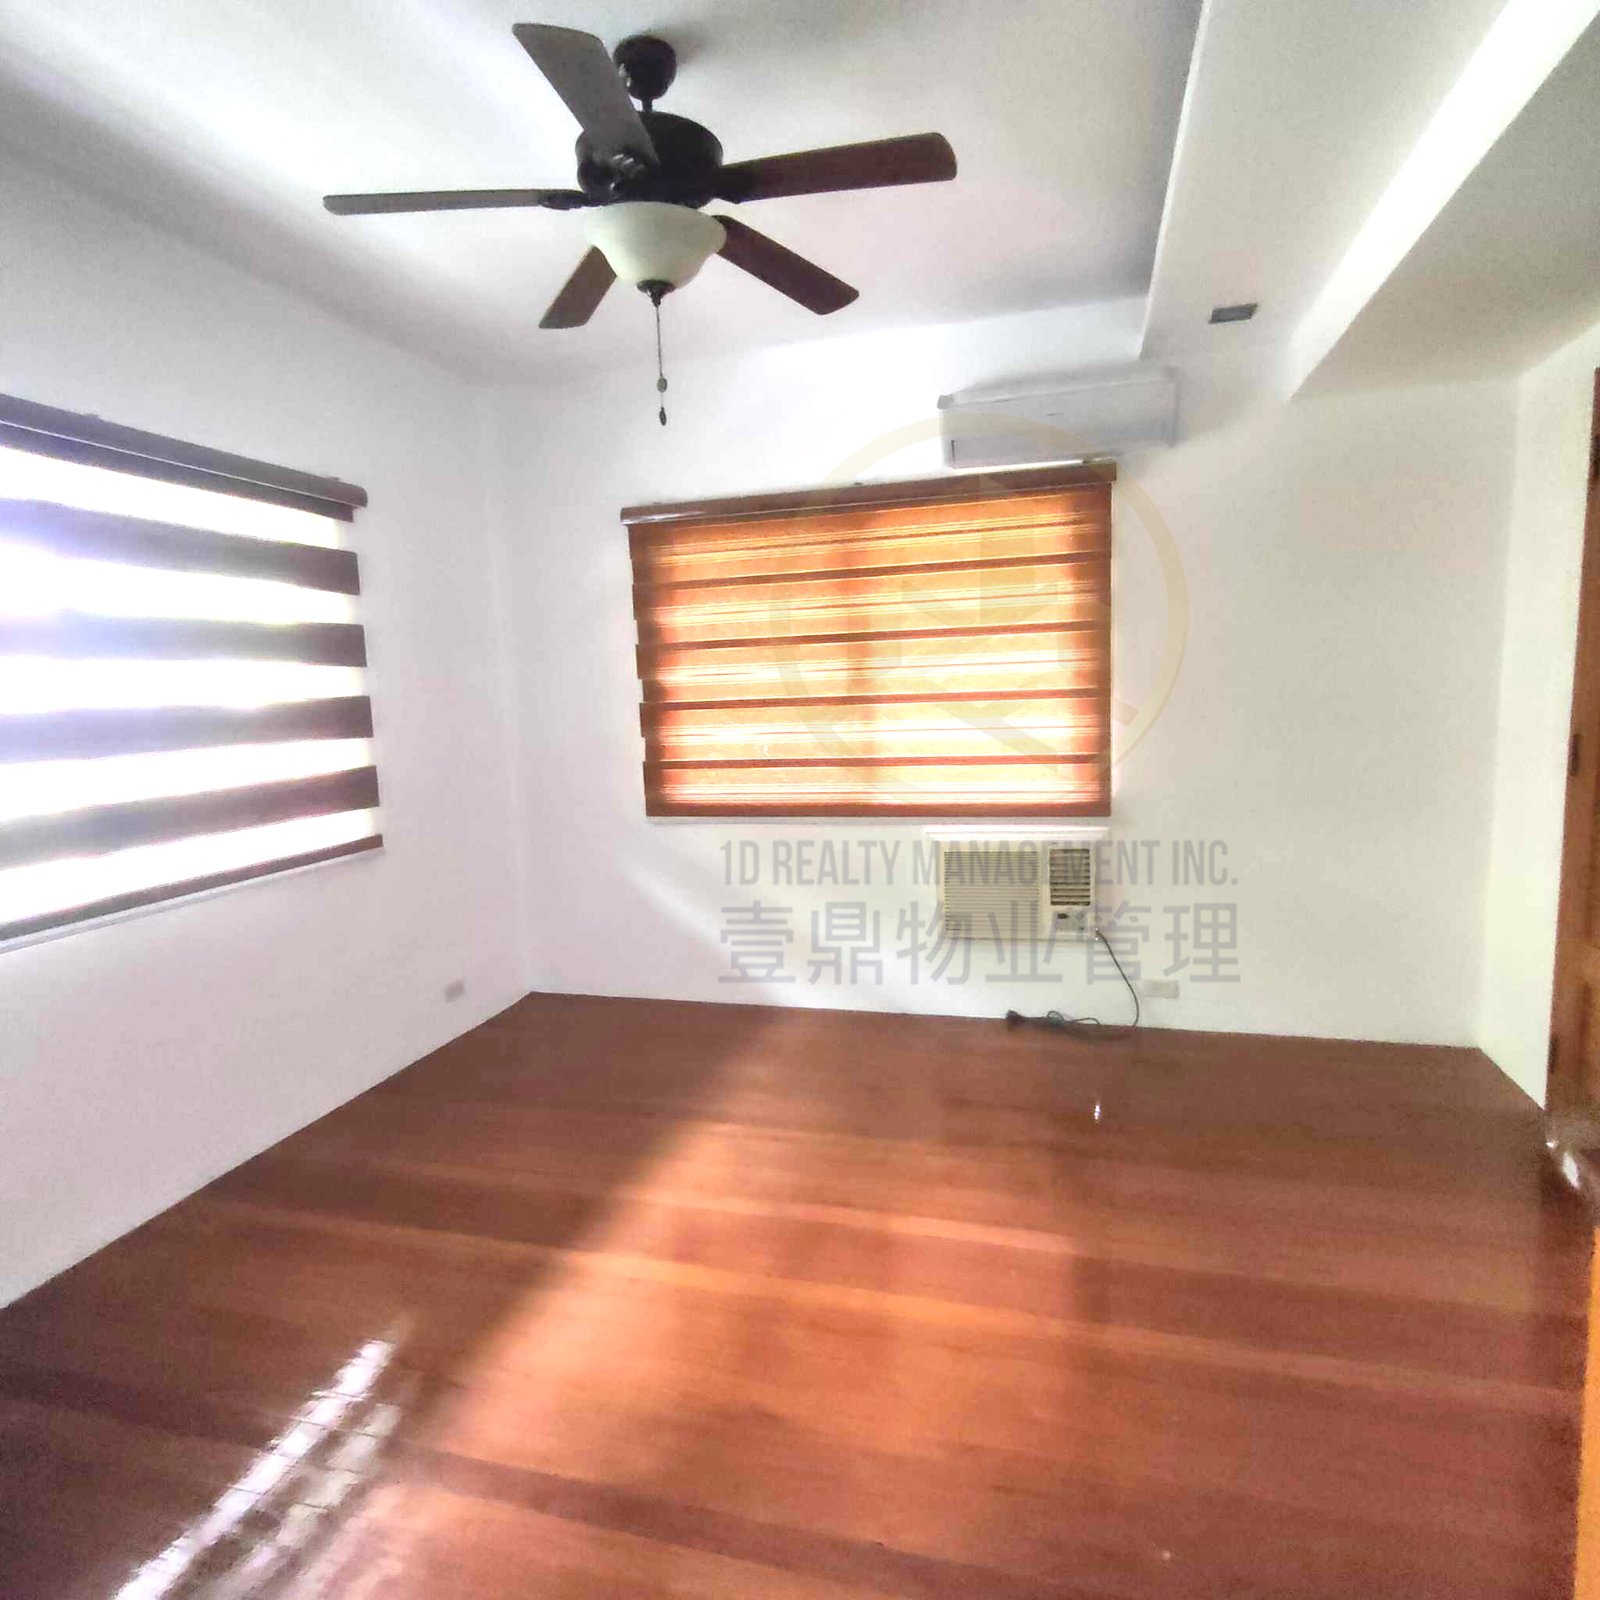 Dasmariñas Village - Makati City - HOUSE AND LOT For LEASE